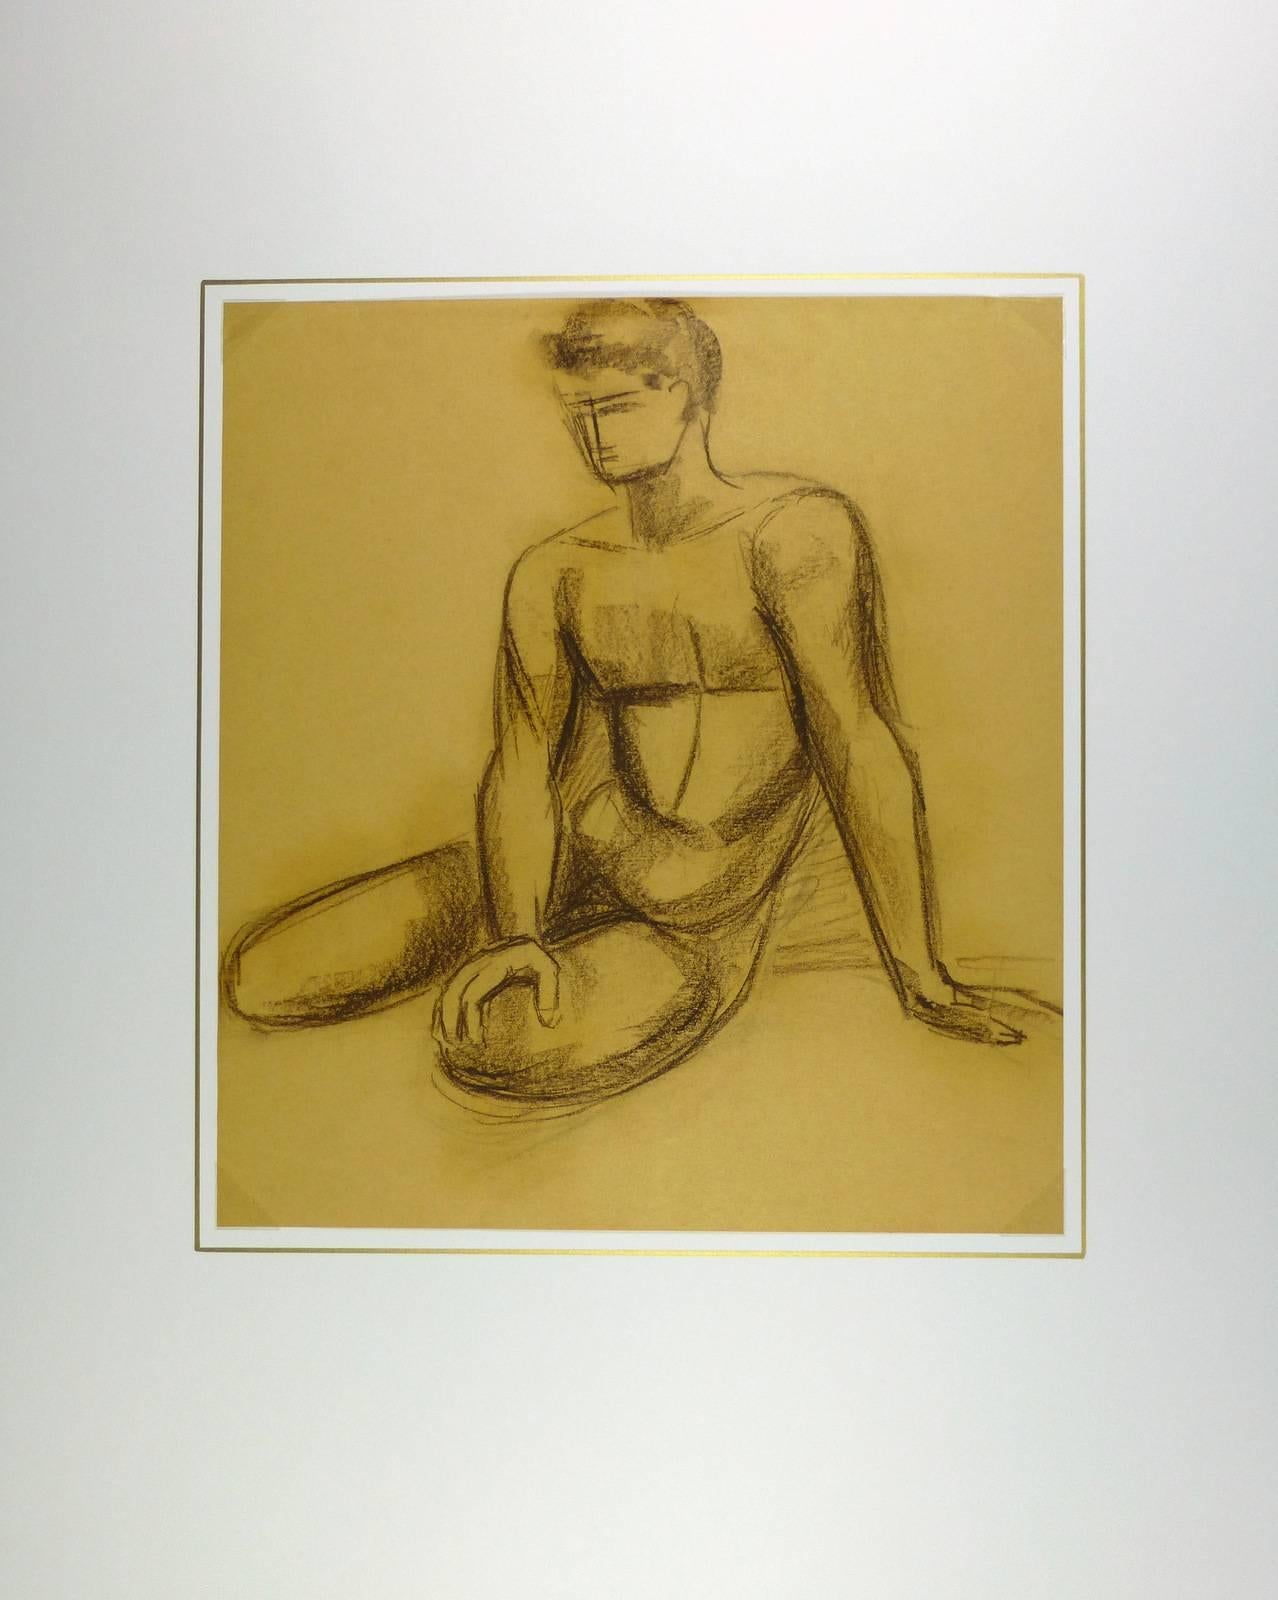 Male nude charcoal sketch by French artist A. Delamaire, circa 1930. 

Original artwork on paper displayed on a white mat with a gold border. Mat fits a standard-size frame.  Archival plastic sleeve and Certificate of Authenticity included. Artwork,